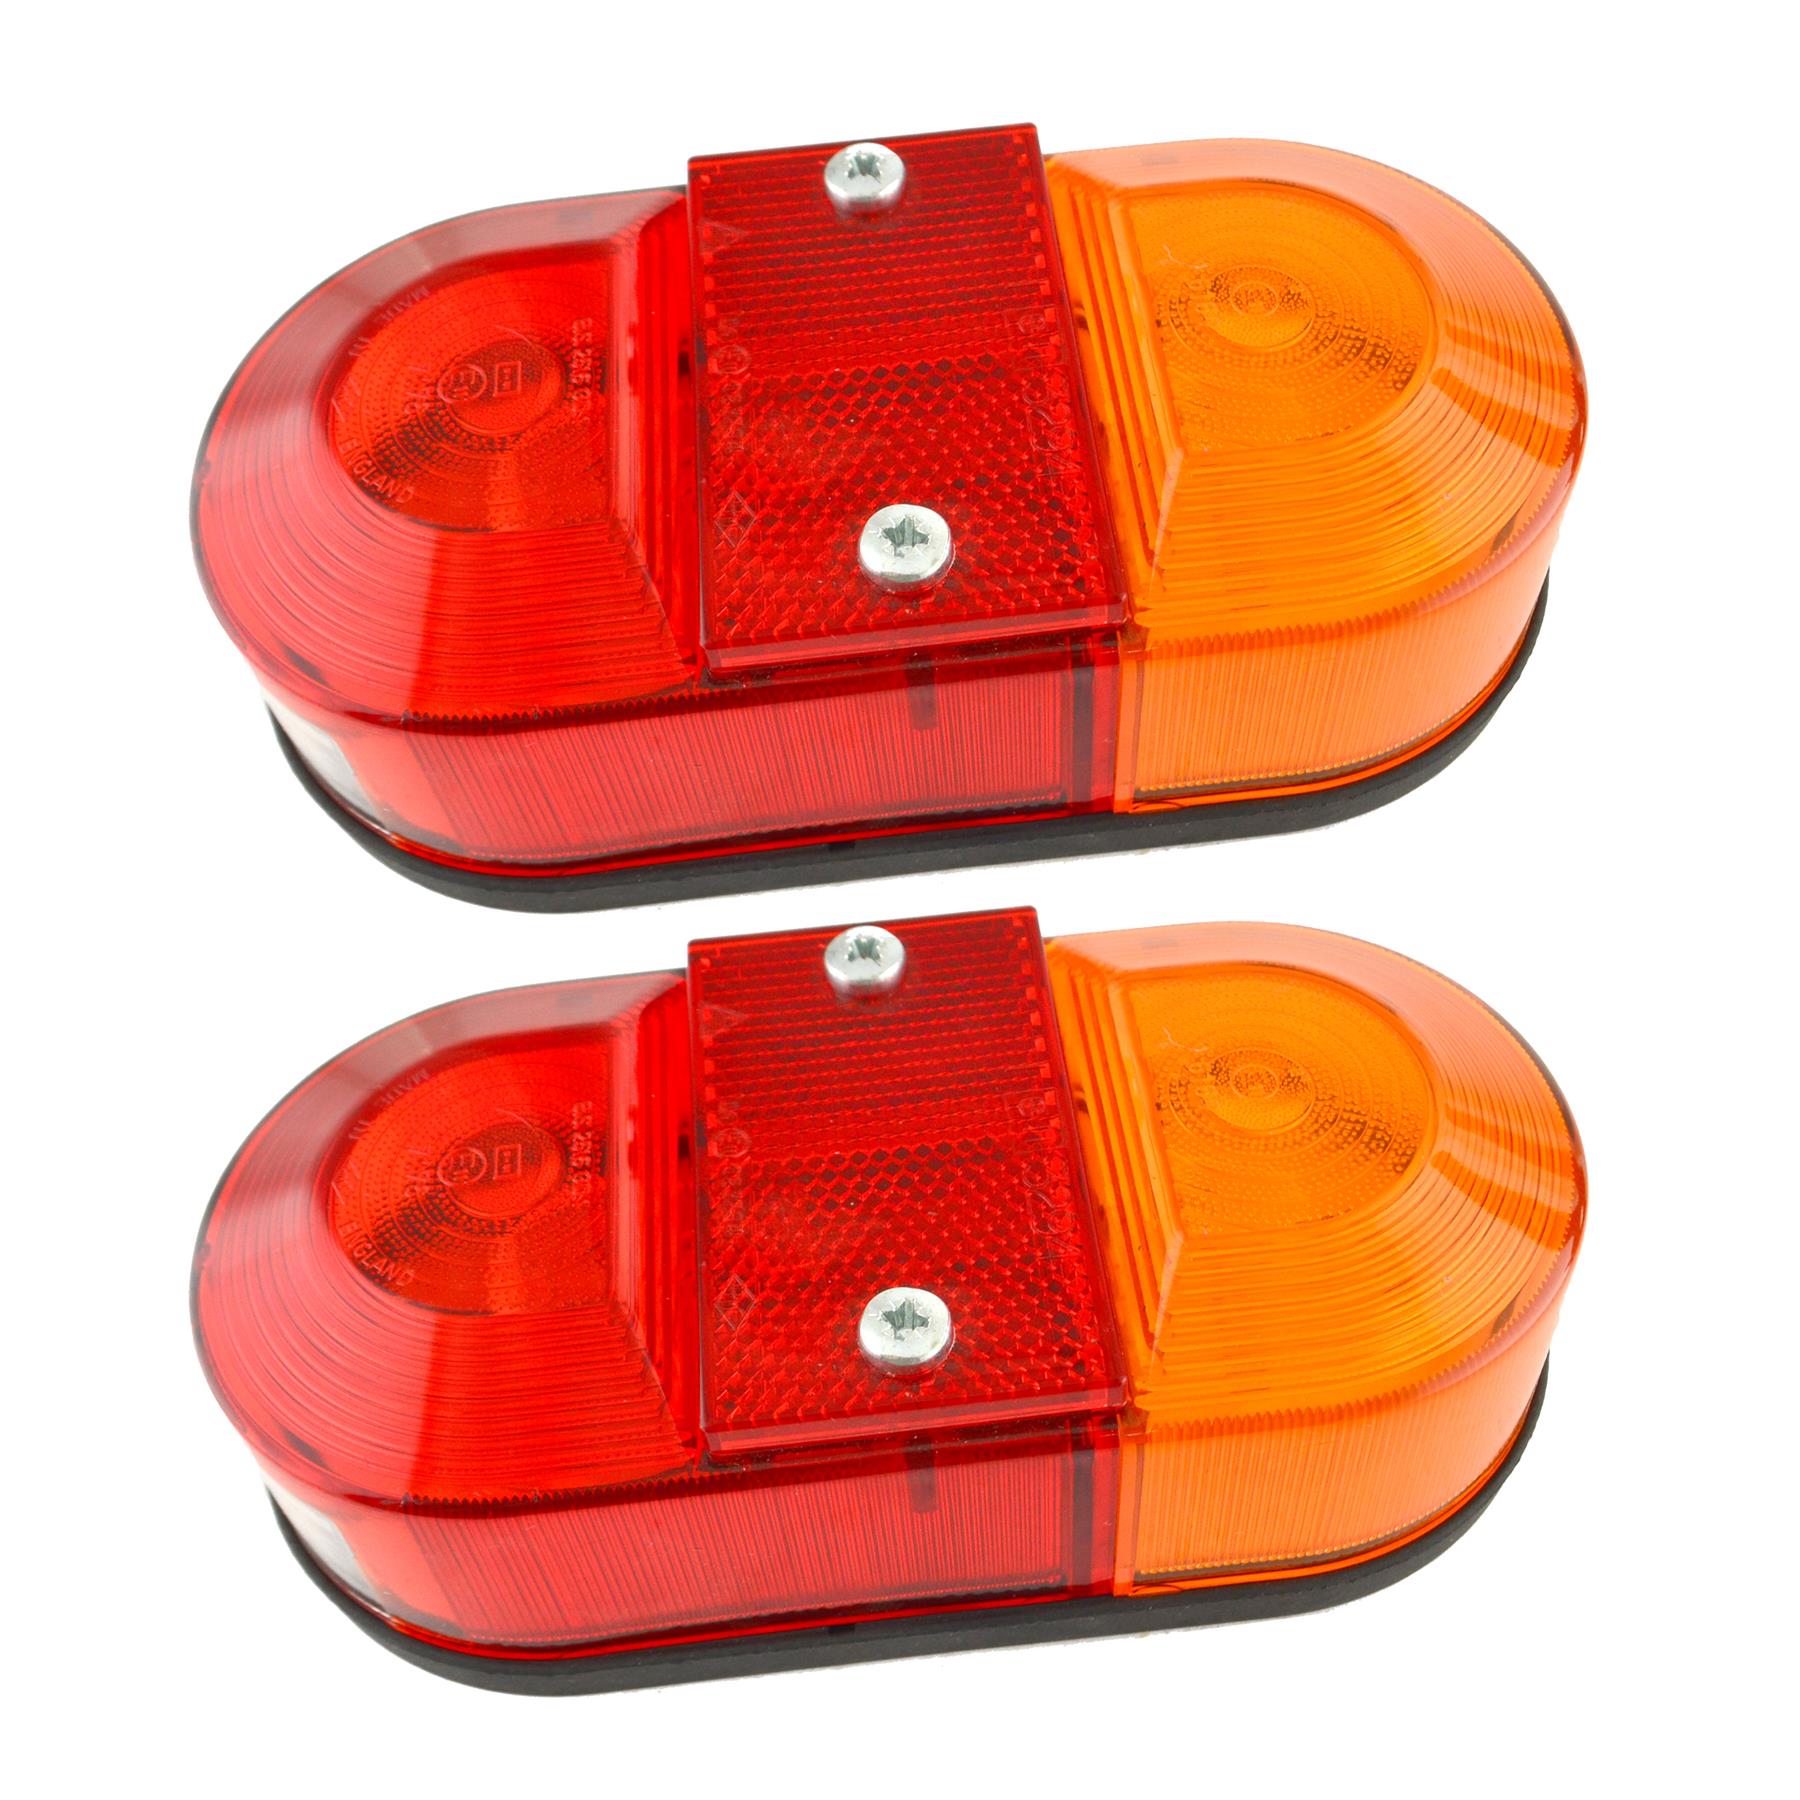 2 x Horse Box Light Trailer Combination Lamp Reflector Number Plate Rear (Pair)